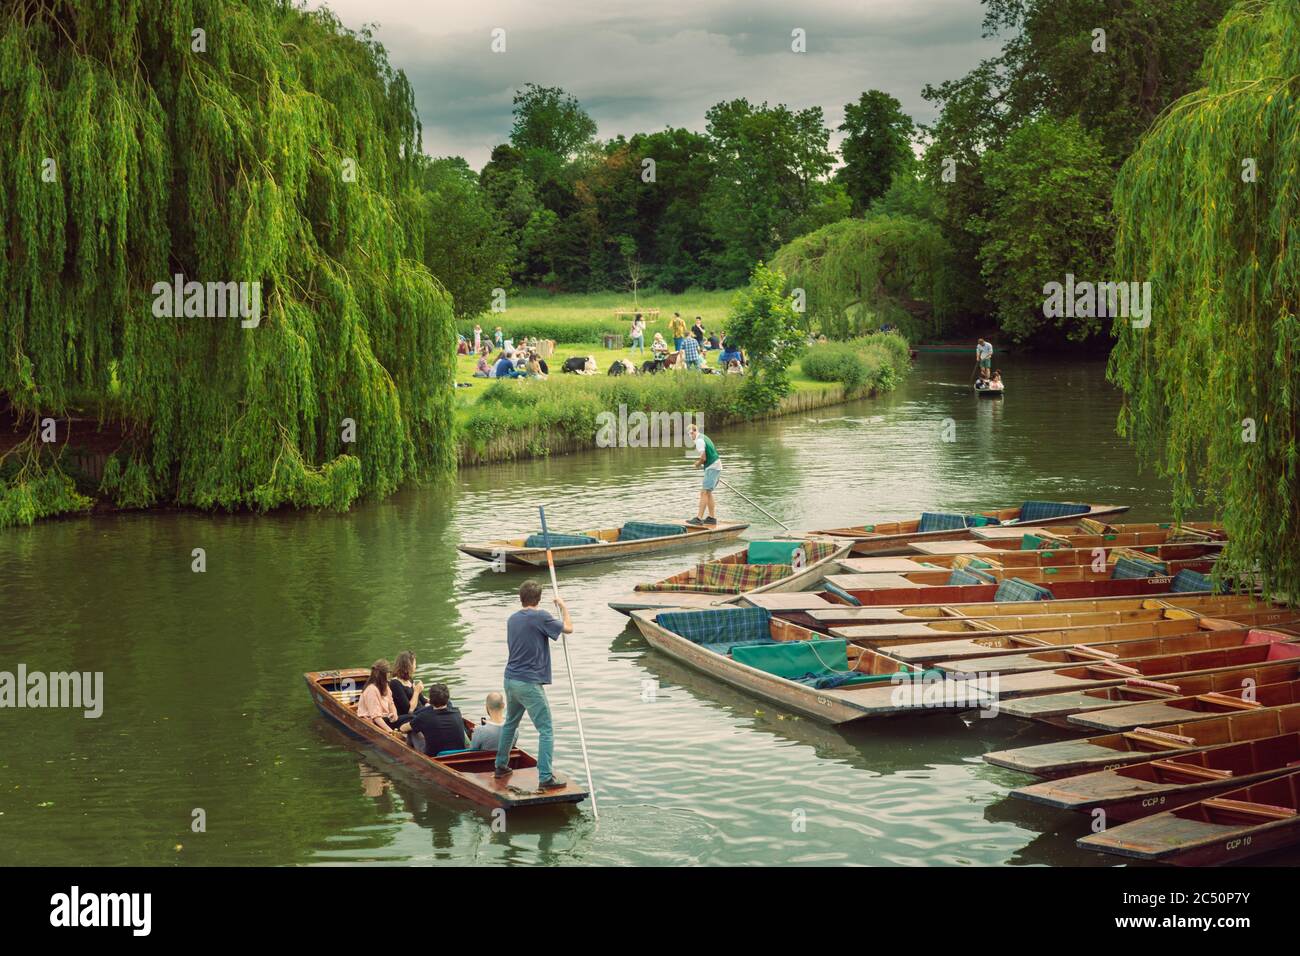 The River Cam in Cambridge of England is best known for punting on the river, flat-bottom boats propelled by a long pole. Stock Photo